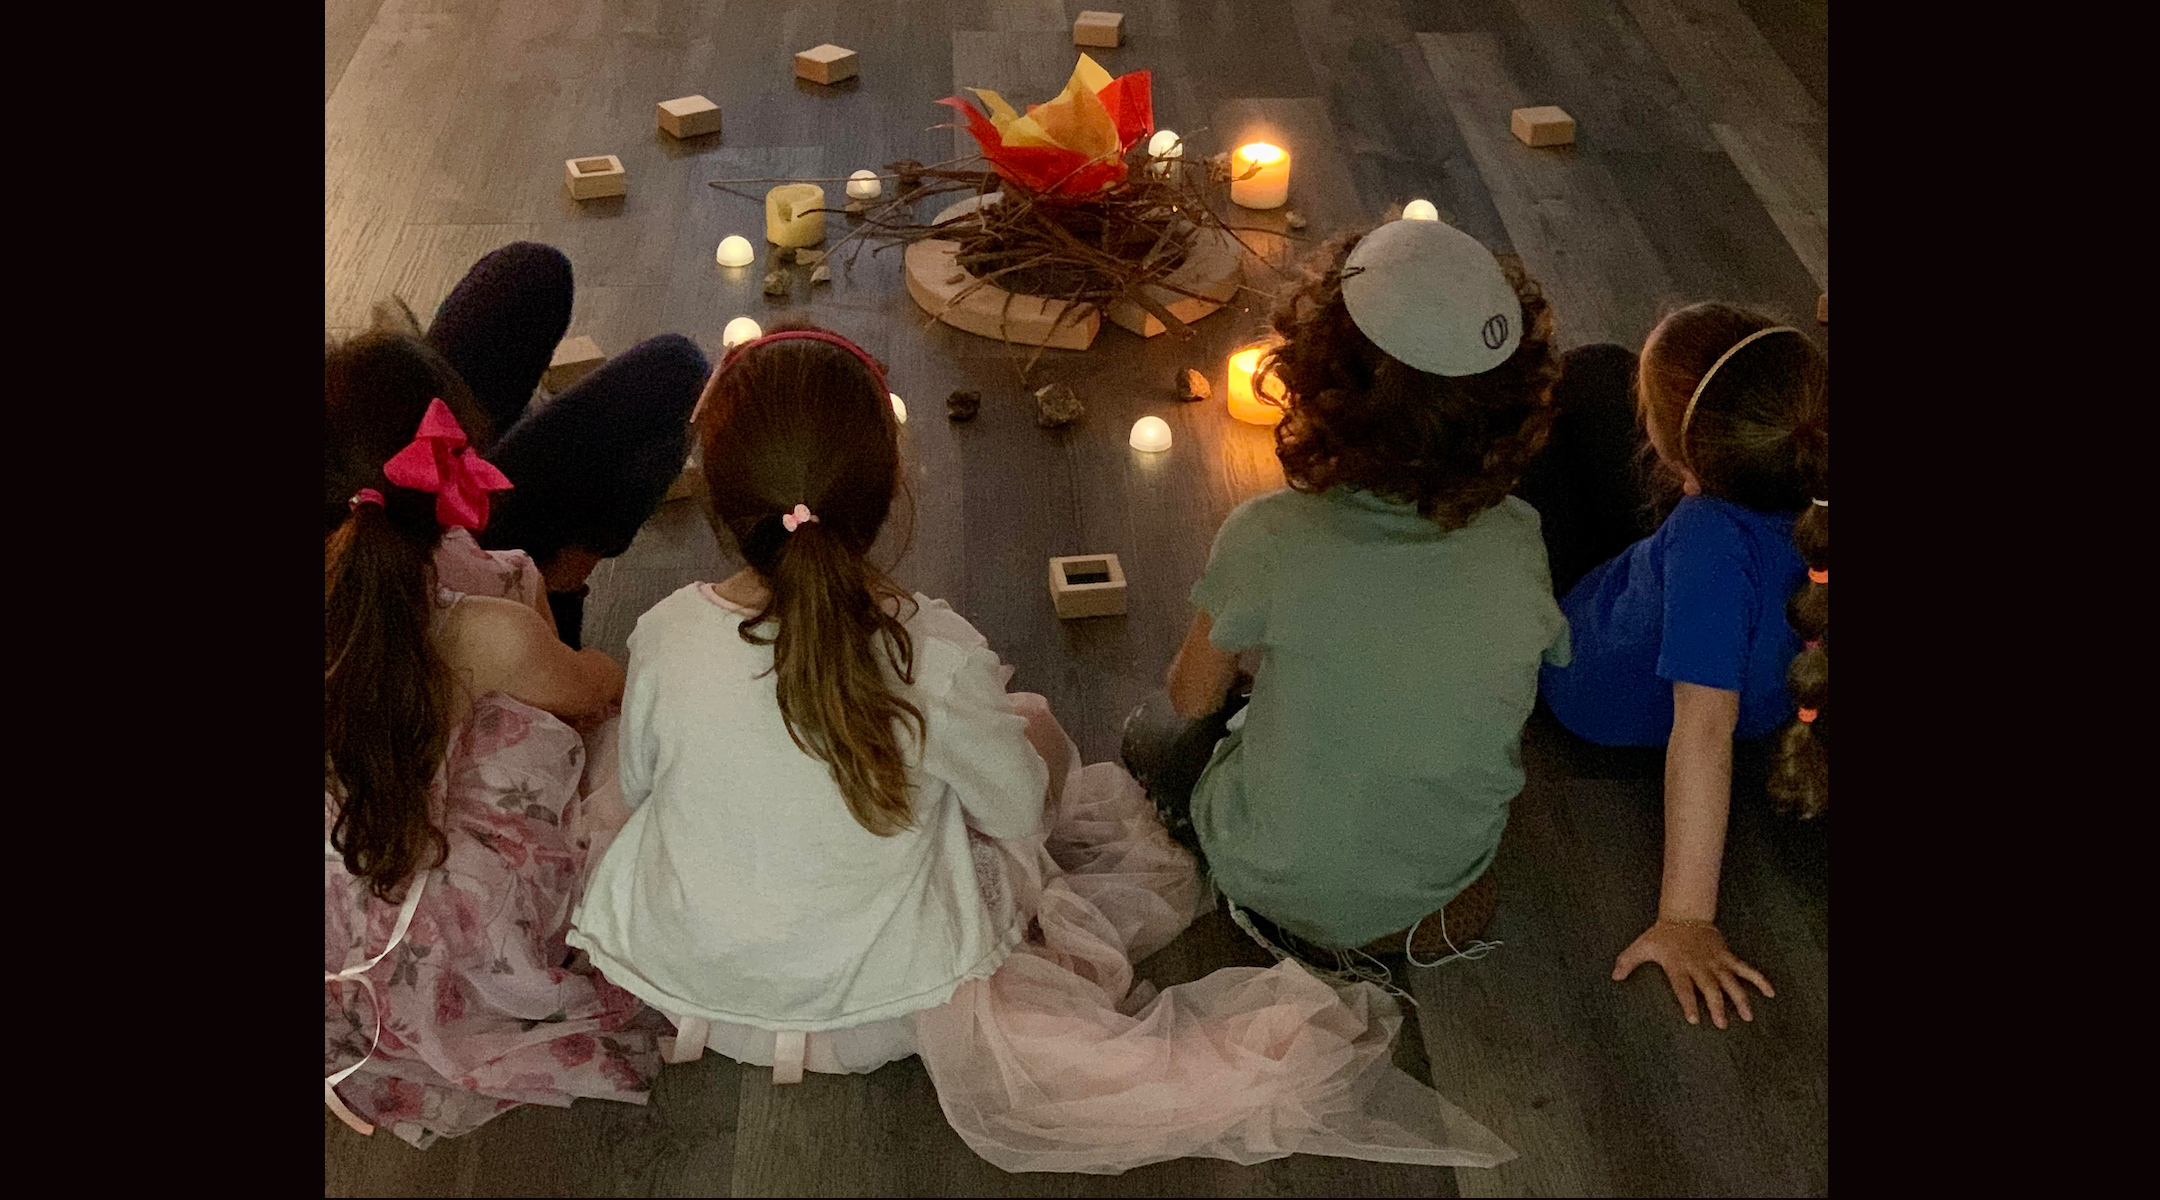 Students at Scheck Hillel Community School in south Florida celebrated Lag B'Omer while commemorating the tragedy in Meron, Israel. (Greg Feldman)